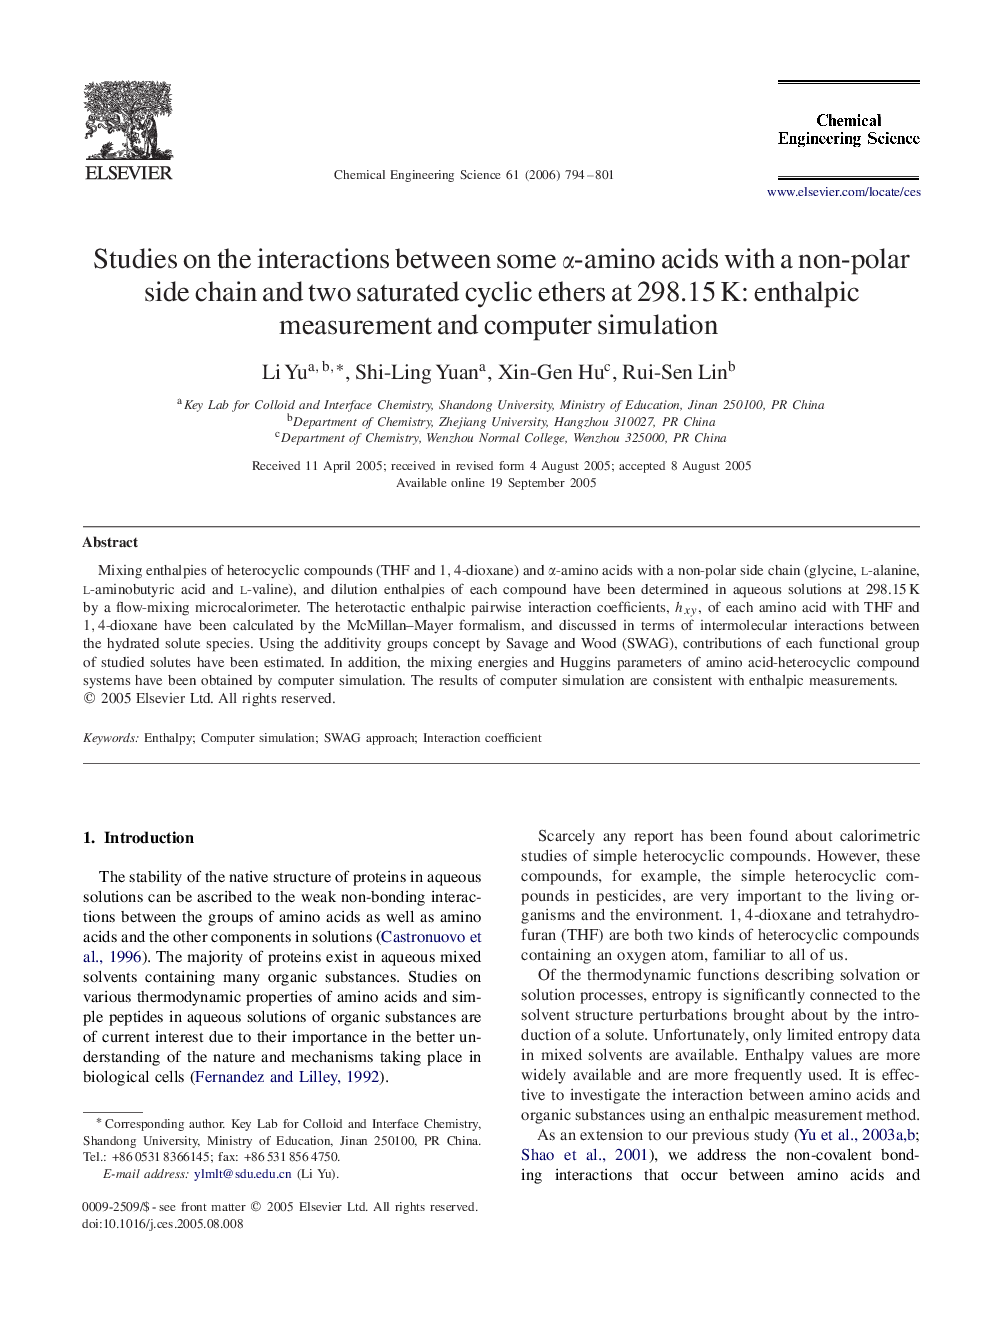 Studies on the interactions between some αα-amino acids with a non-polar side chain and two saturated cyclic ethers at 298.15 K: enthalpic measurement and computer simulation